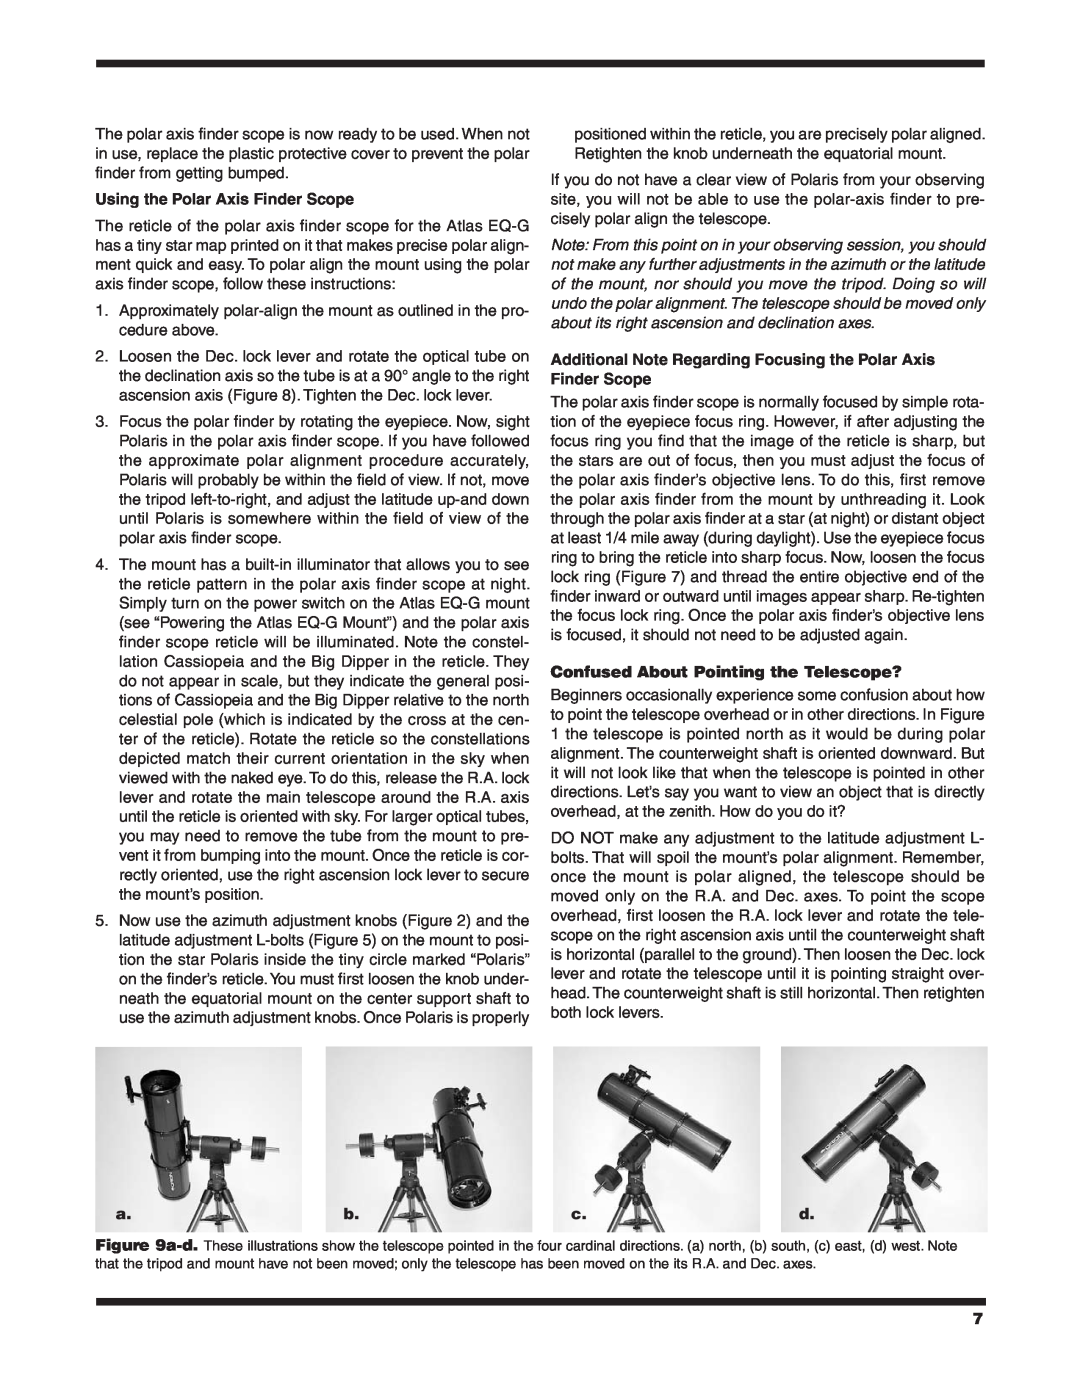 Orion EQ-G Using the Polar Axis Finder Scope, Additional Note Regarding Focusing the Polar Axis Finder Scope 